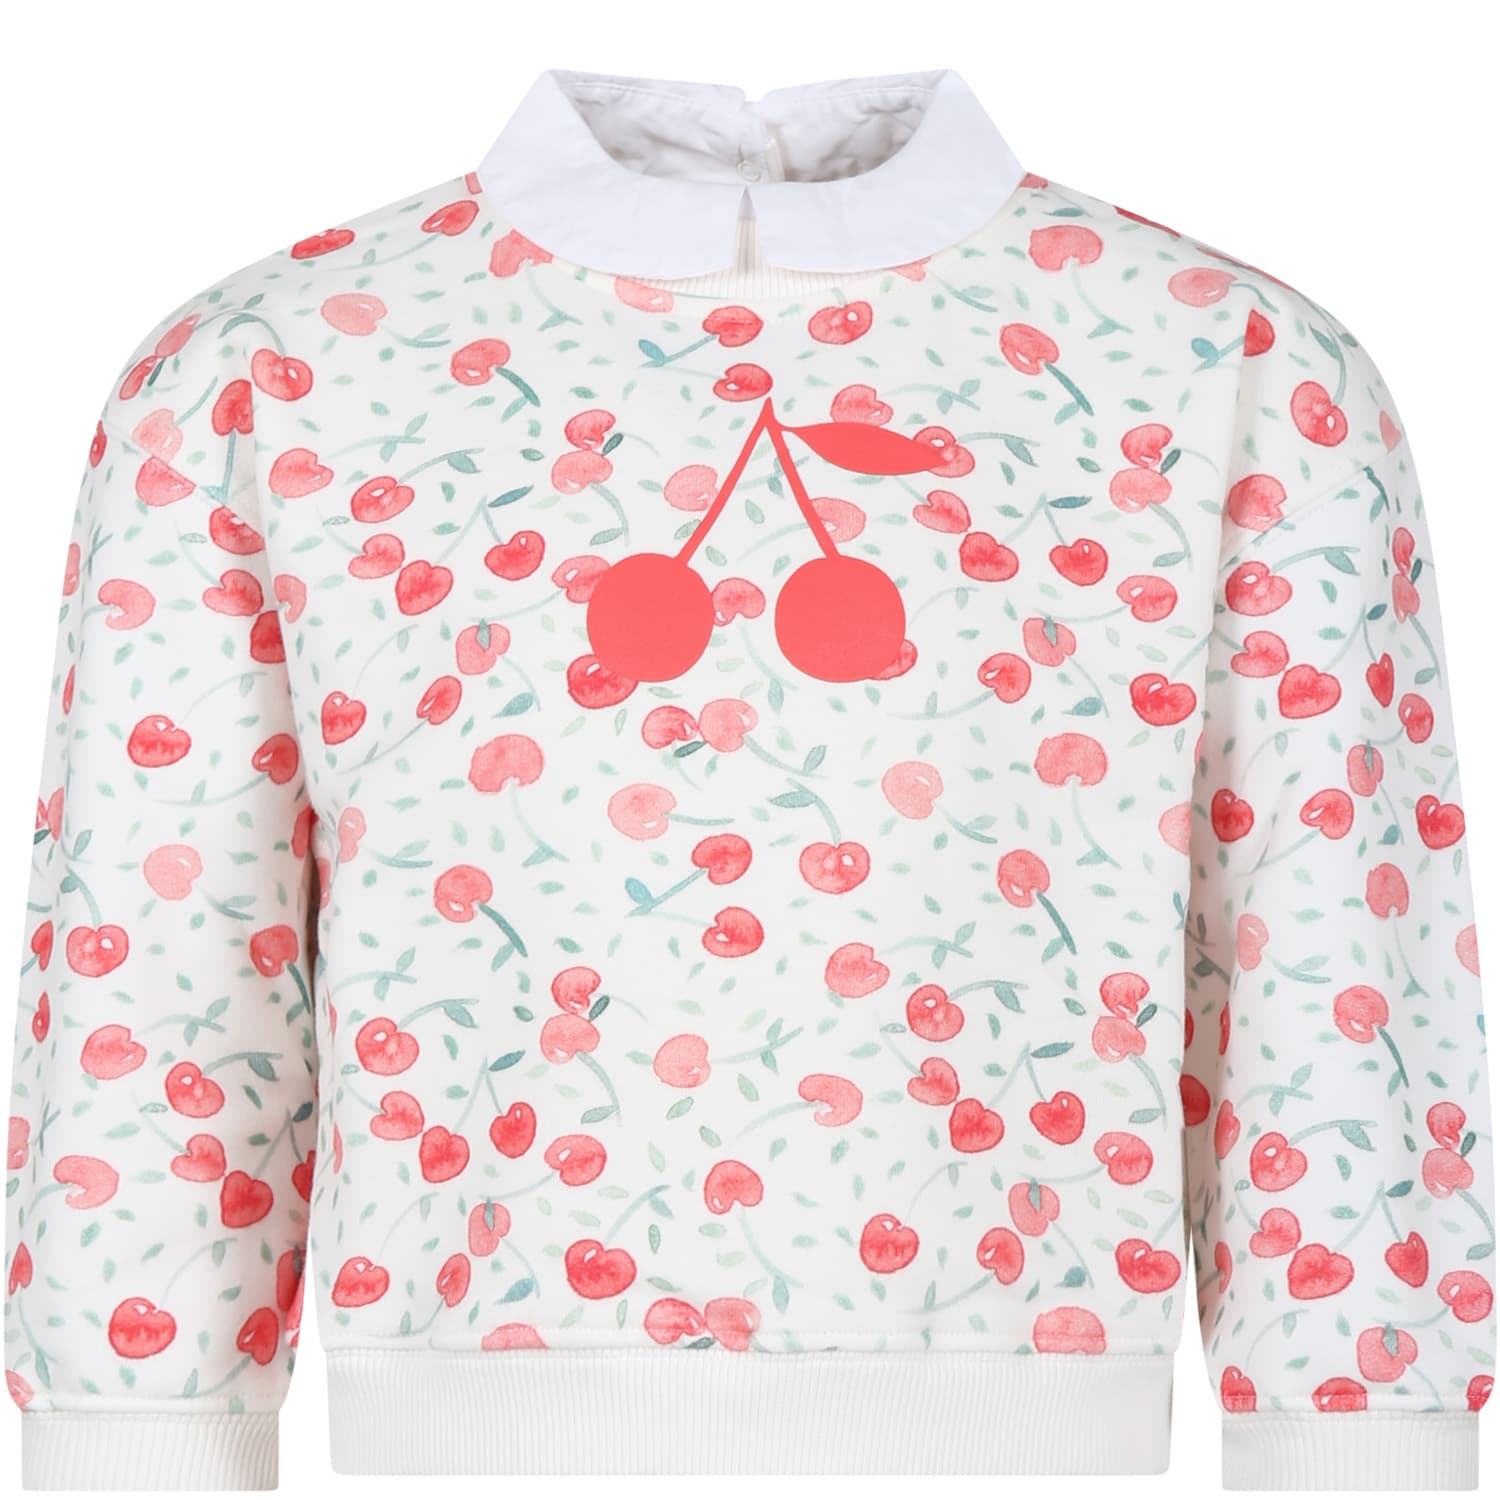 Bonpoint Kids' Ivory Sweatshirt For Girl With Iconic Cherries In White